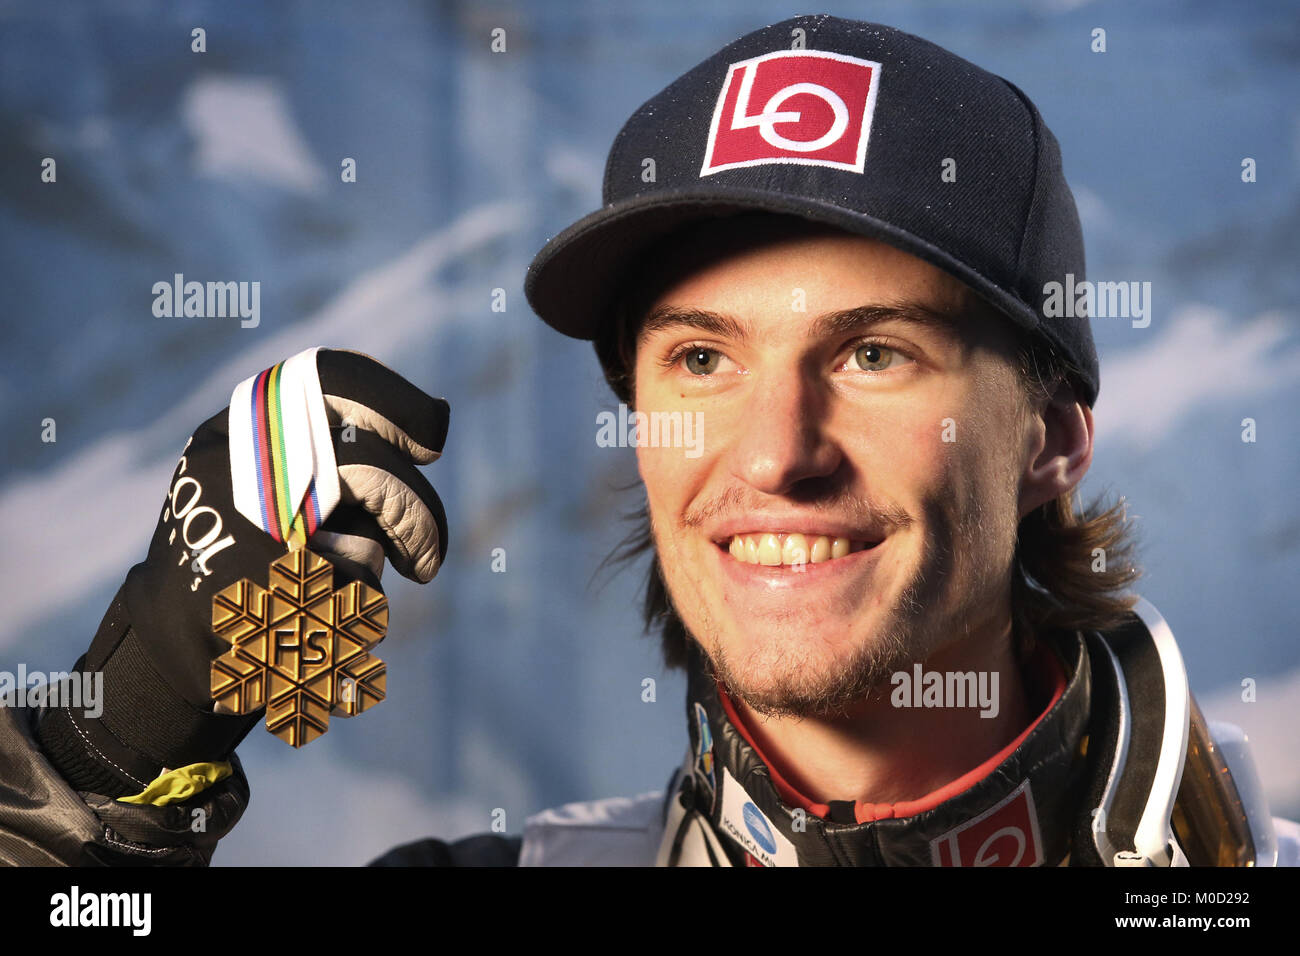 Daniel Andre Tande of Norway holds up his gold medal at the Ski Flying World Championships in Oberstdorf, Germany, 20 Janaury 2018. Tande came first in the individual competition. Photo: Karl-Josef Hildenbrand/dpa Stock Photo